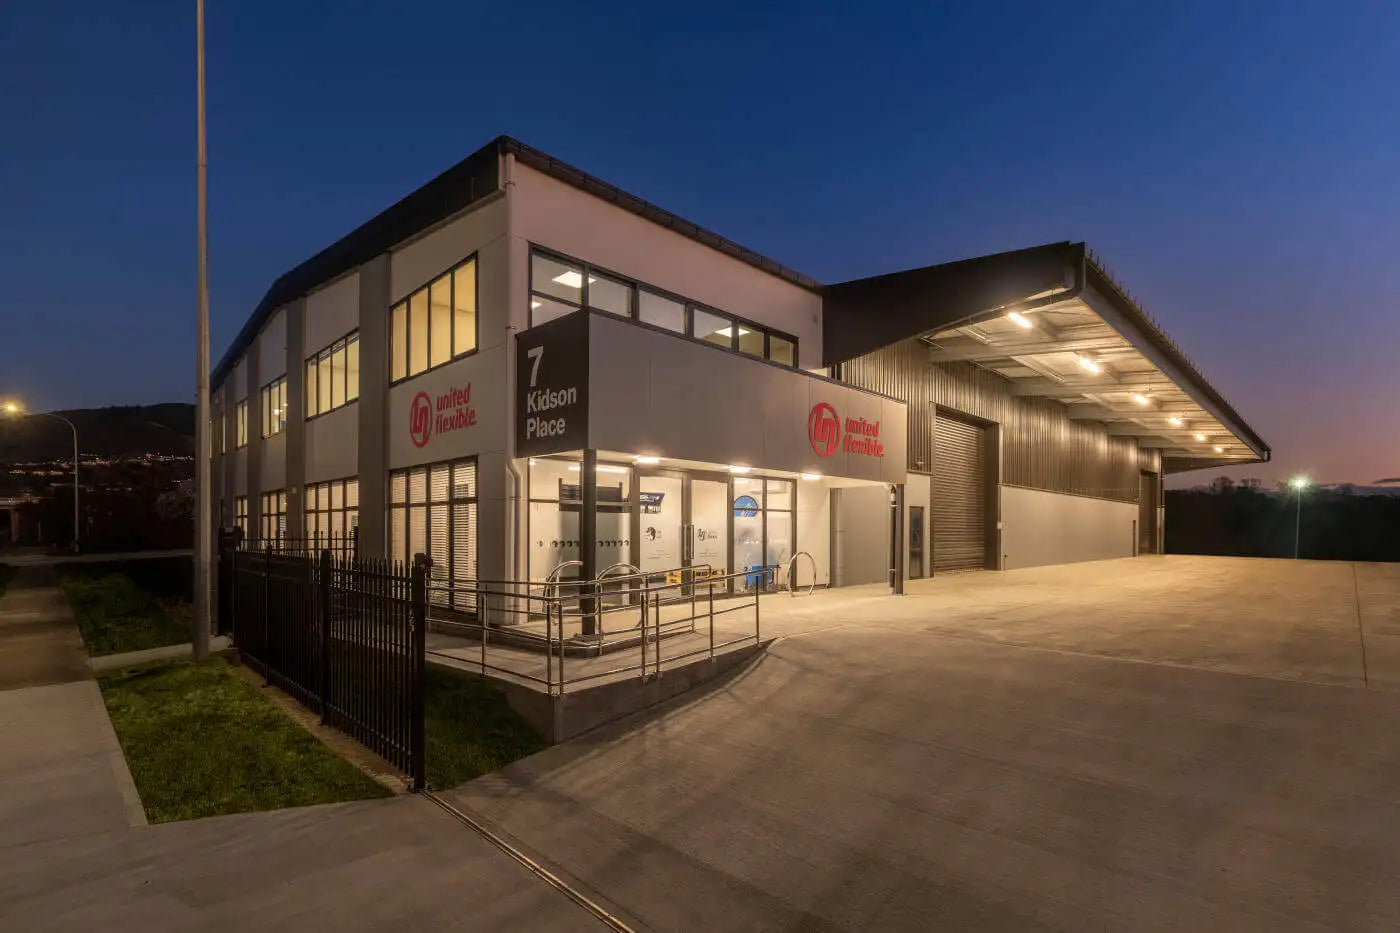 An evening photo of United Flexible's large warehouse facility in Nelson. 7 Kidson Place Nelson. It shows a clean and organised secure industrial building